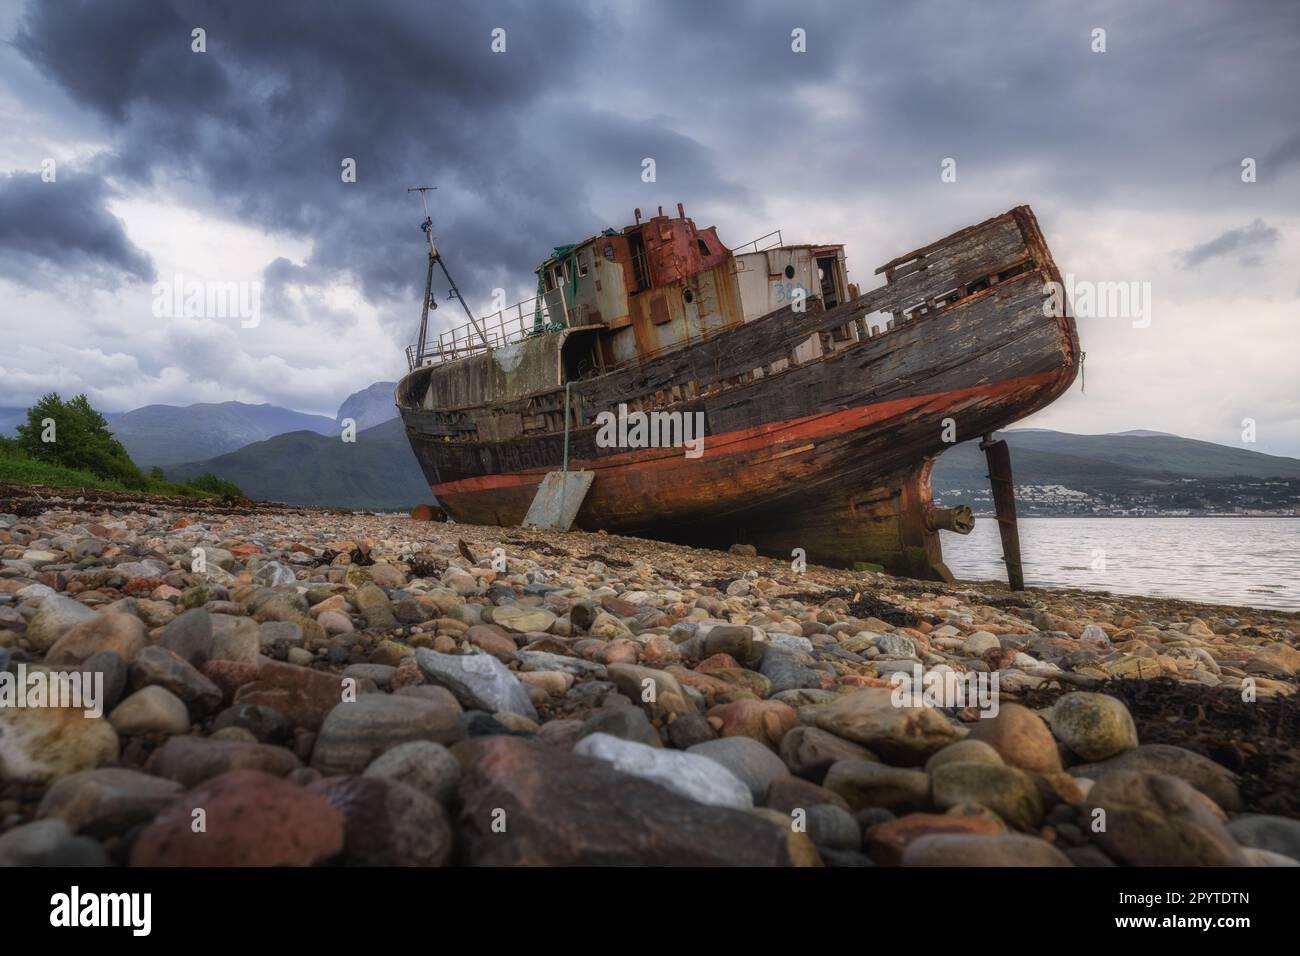 The eerie Corpach shipwreck with great Ben Nevis, Scotland. Stock Photo